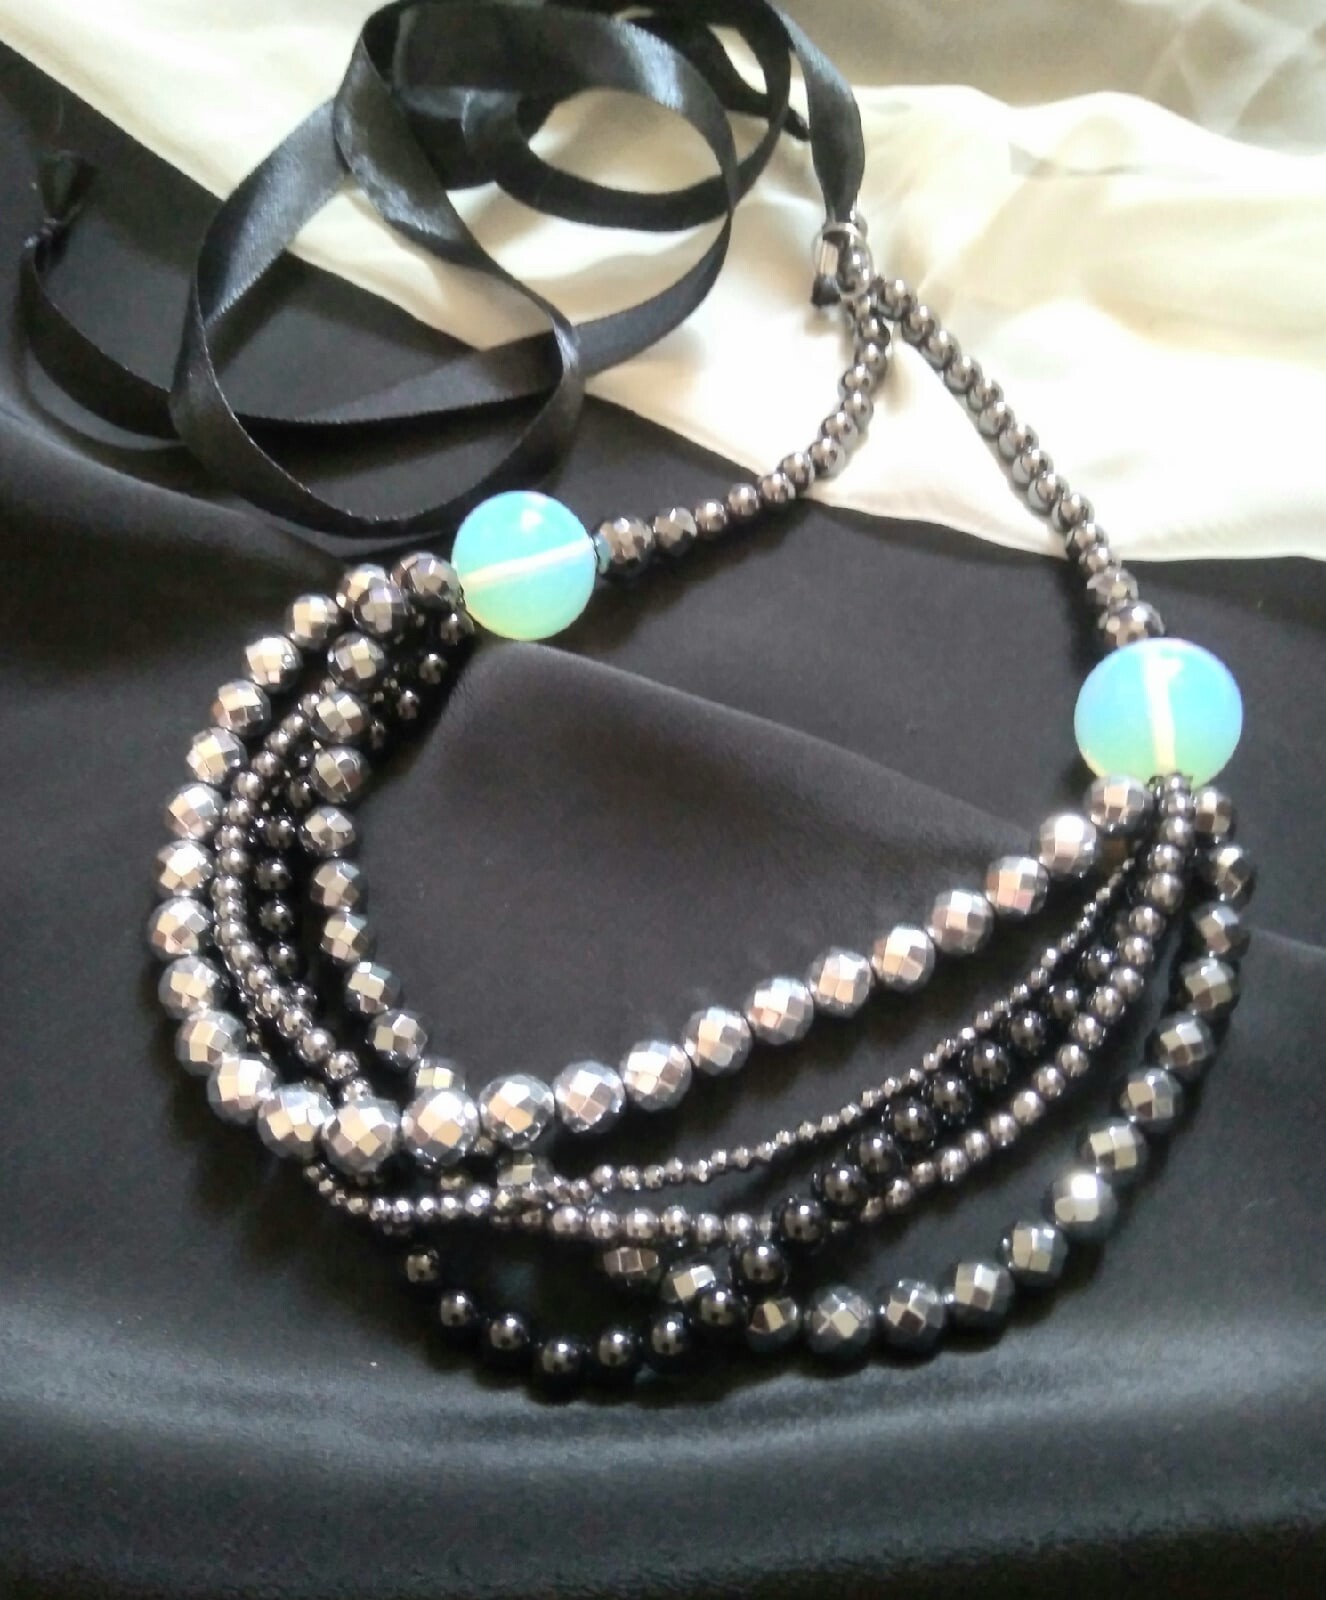 ArtStation - Handmade necklace made of natural stones - hematite and ...